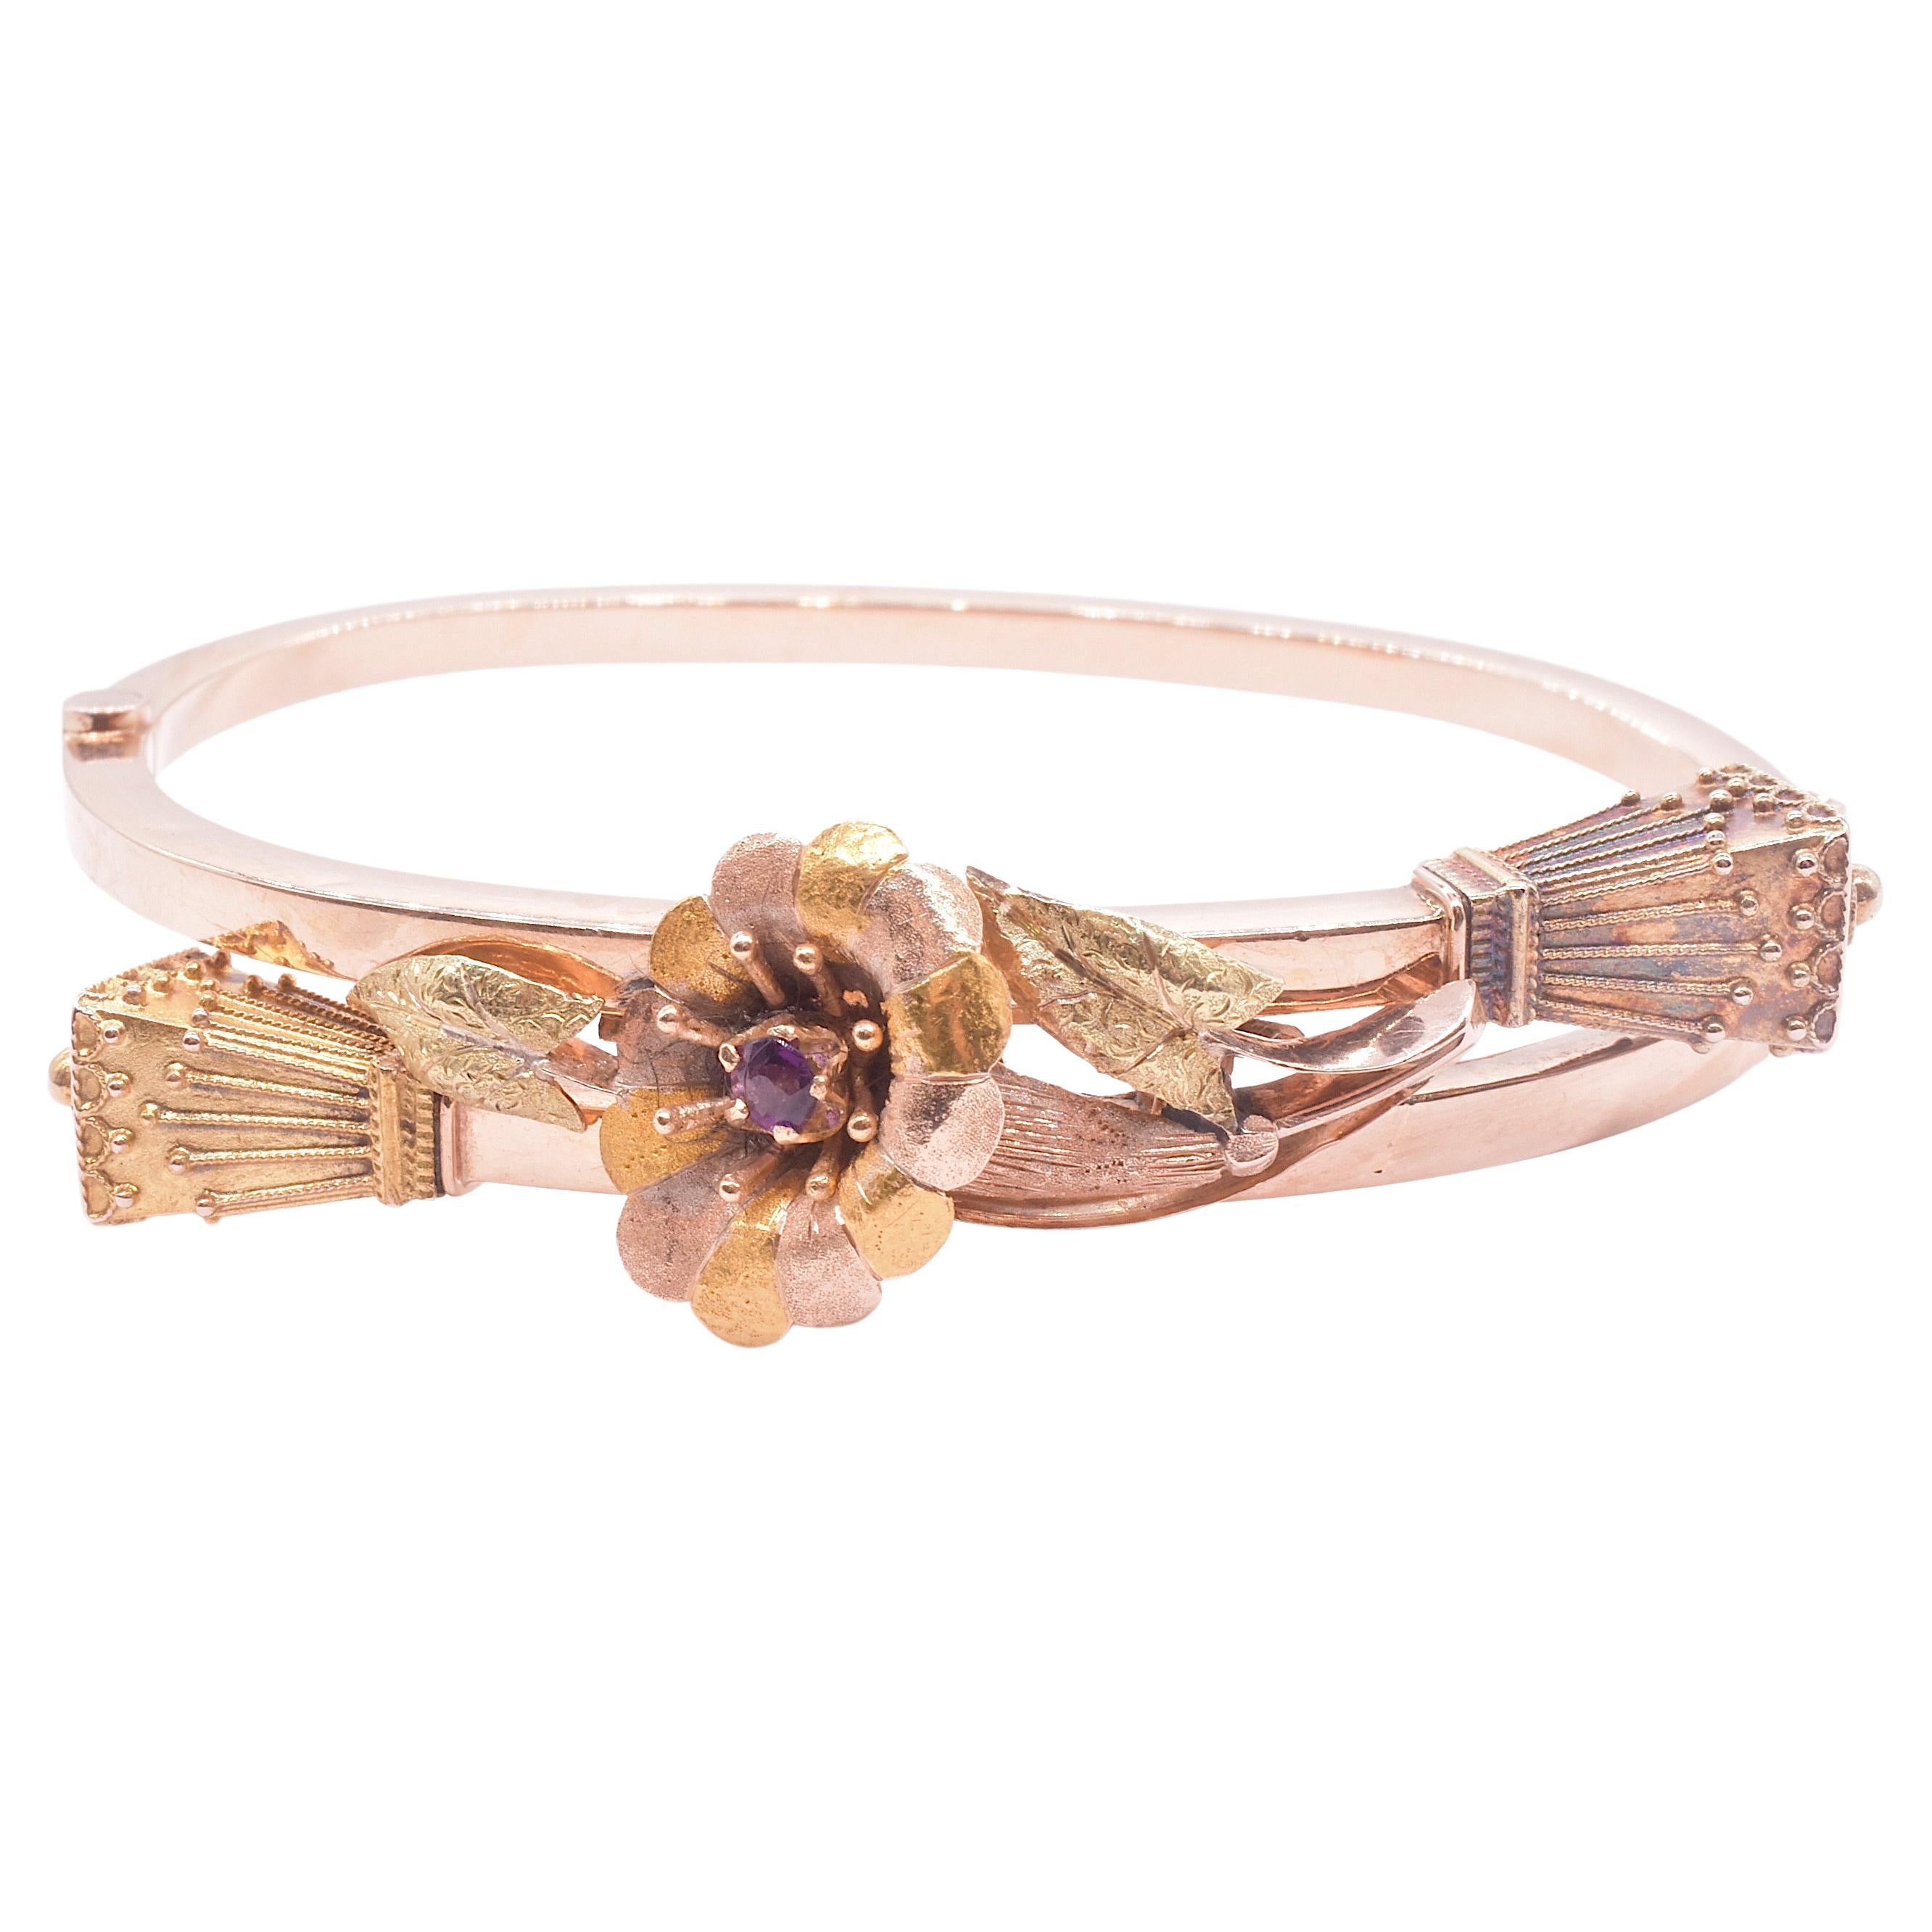 This two-color gold articulated hinged bracelet is capped with lantern finials and a 2 color gold pansy with leaves springing forth in between the finials. We love the ornamental detail; the leaves have alternating gold colors and a garnet at the